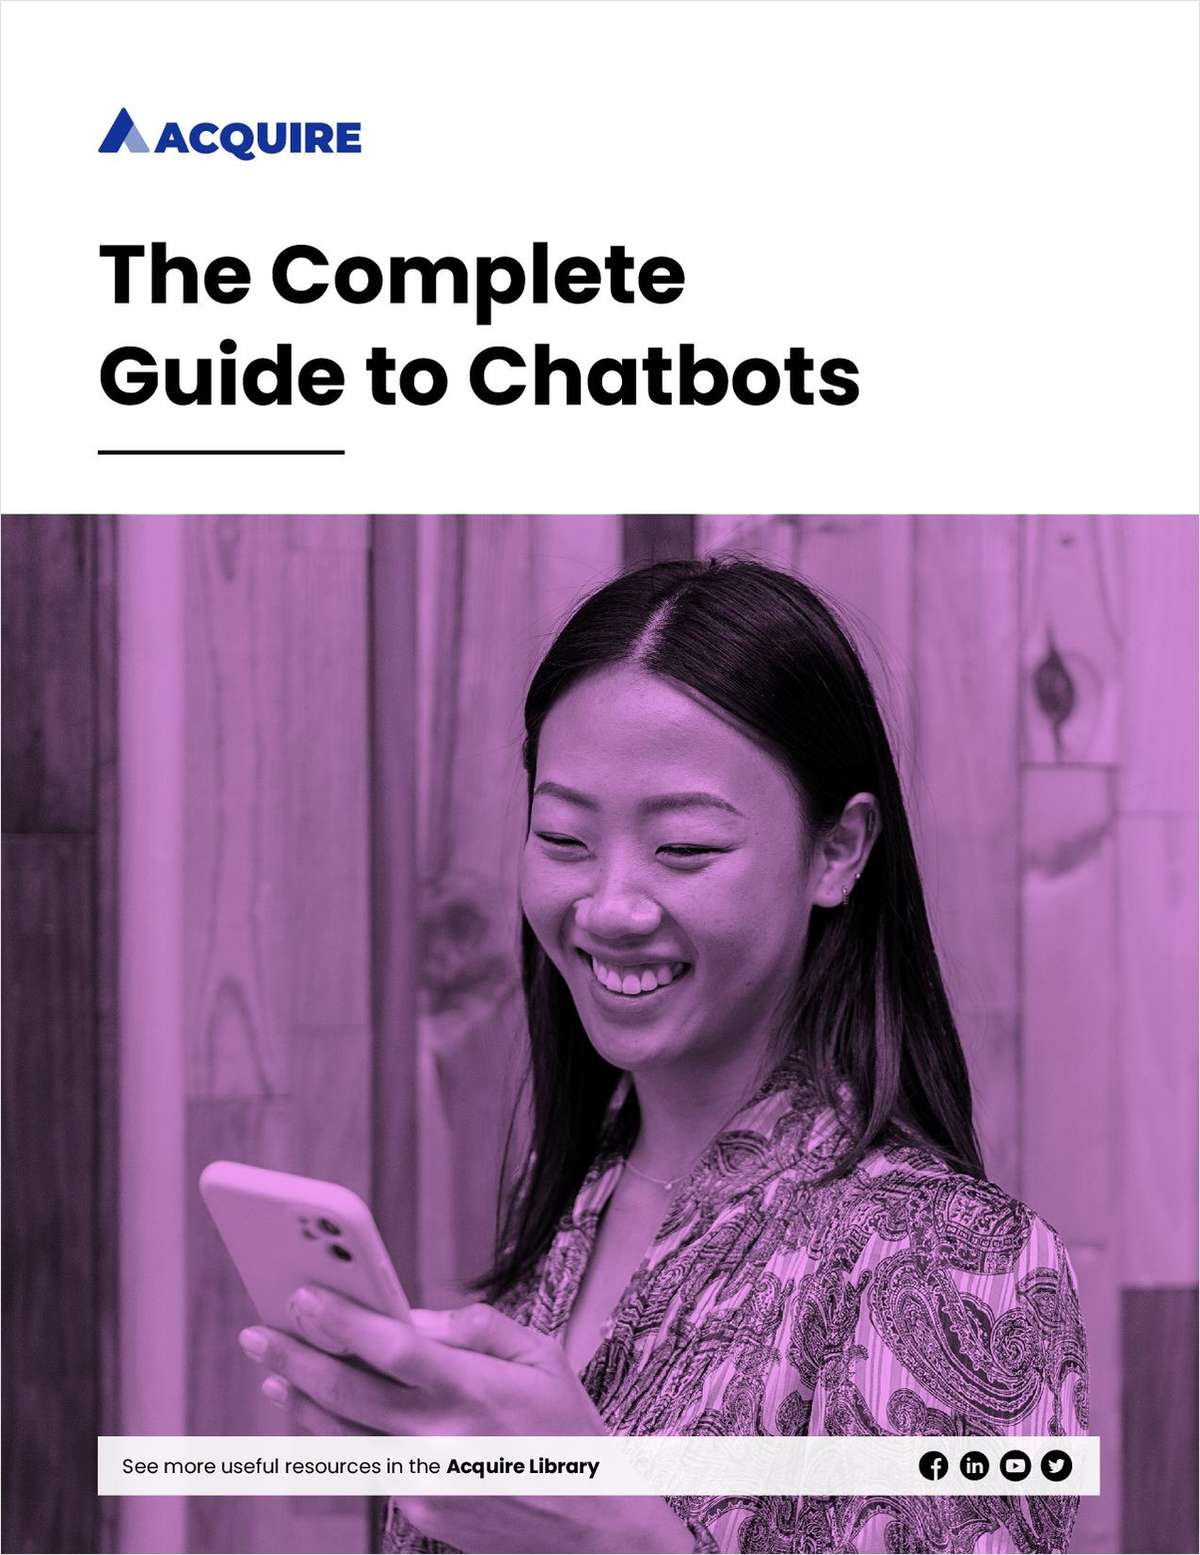 The Complete Guide to Chatbots